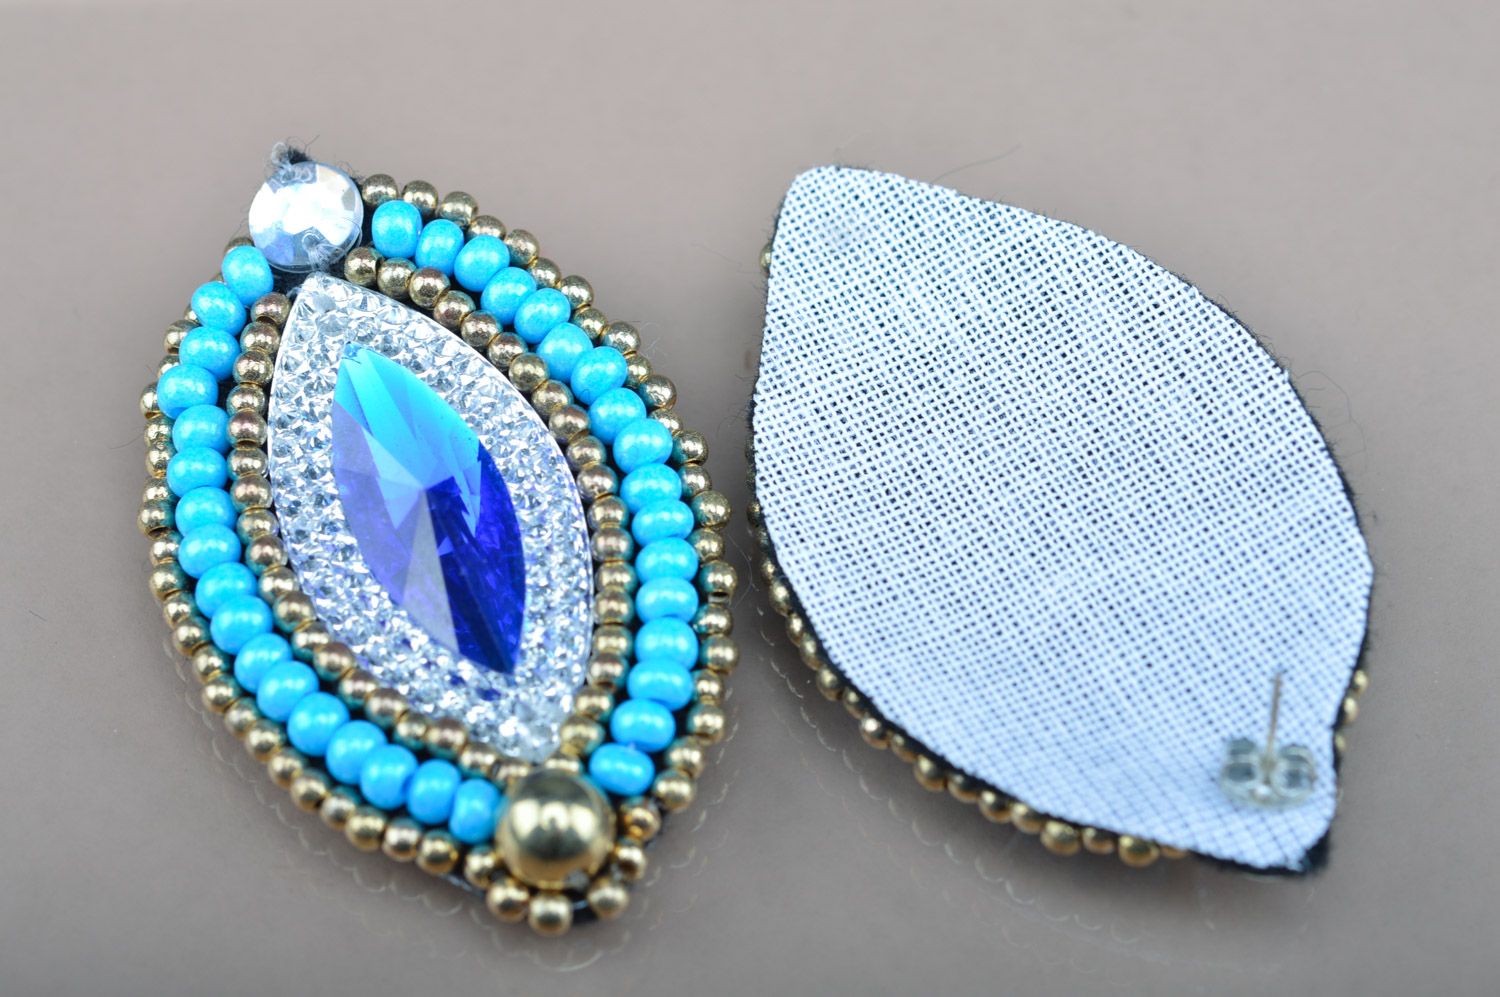 Handmade large stud earrings with beads and stones in blue color palette photo 2